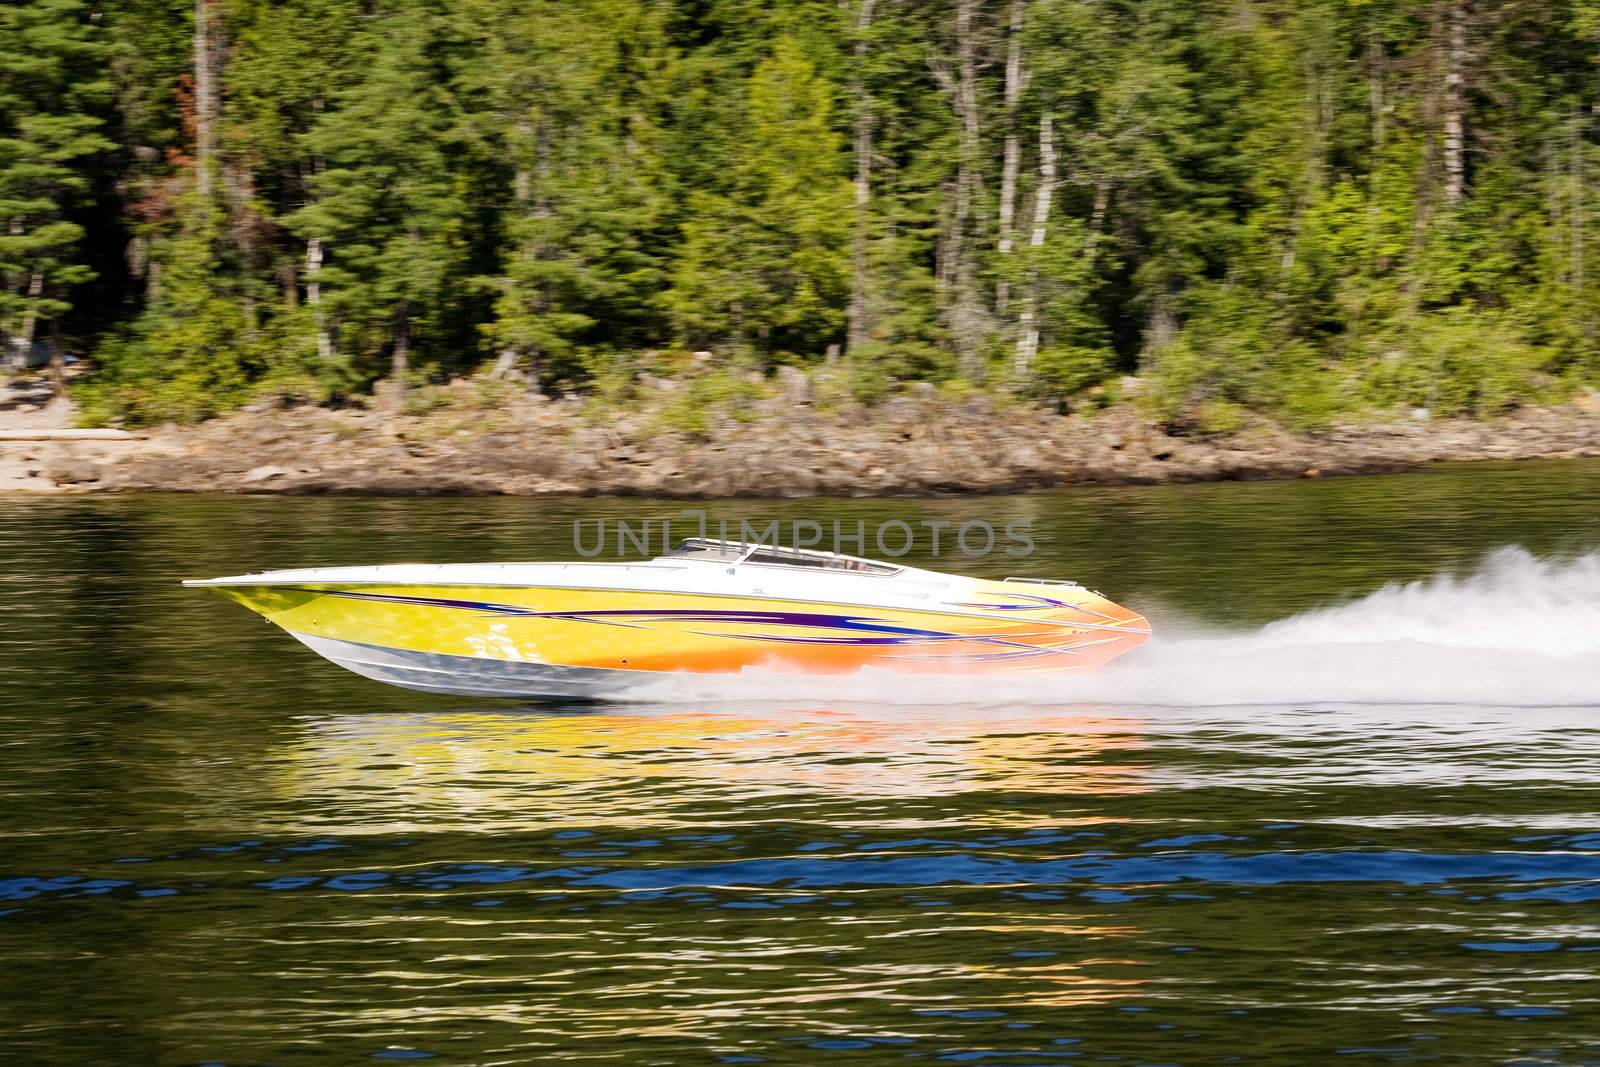 A speedboat on a lake - motion blut on the background with the boat sharp